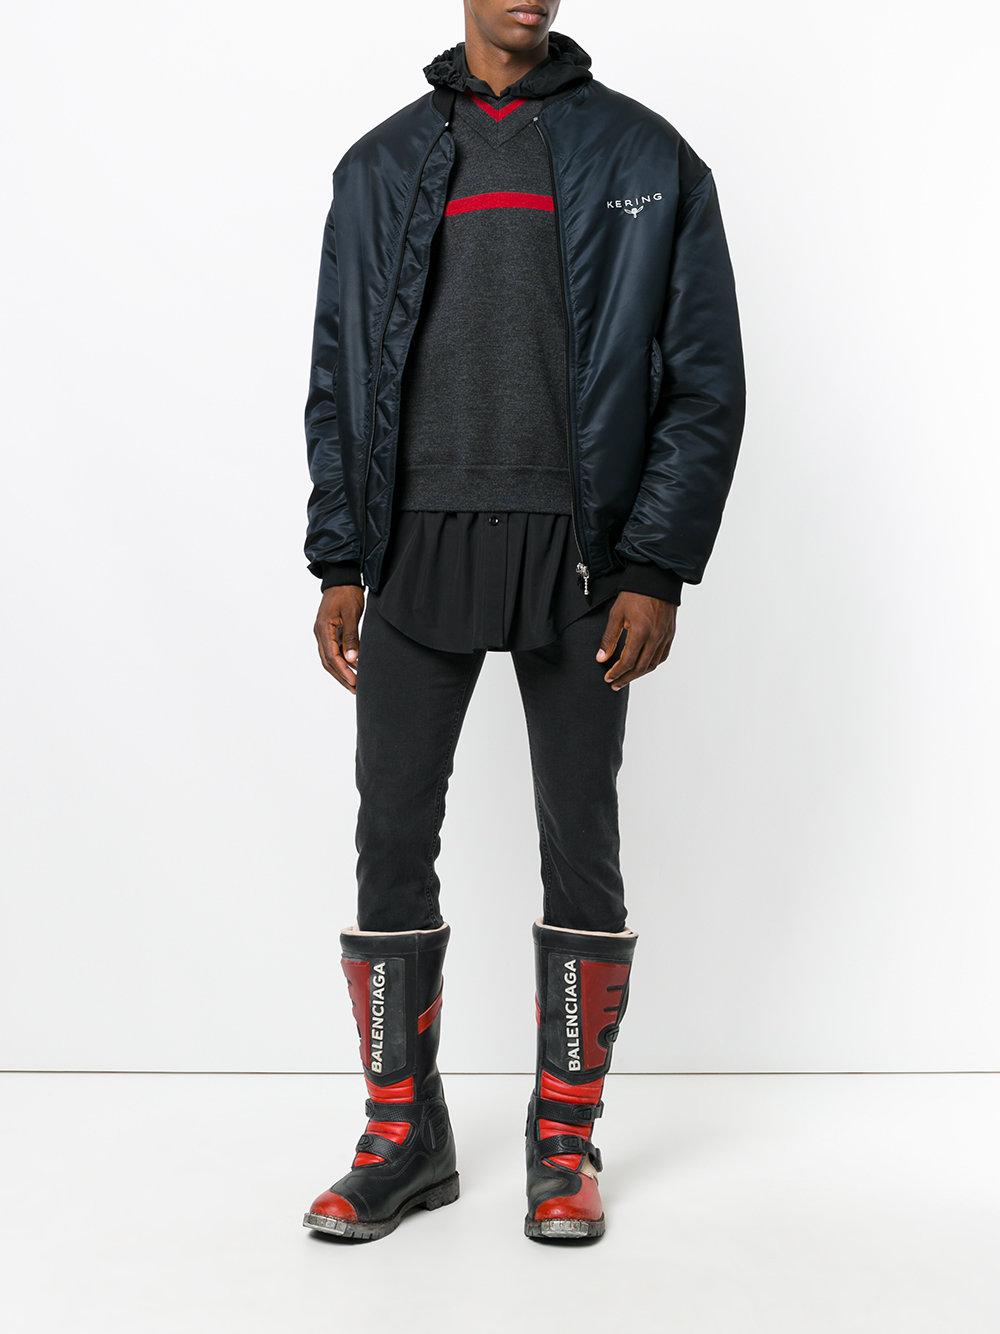 Balenciaga Leather Rider Moto Boots in Red for Men | Lyst